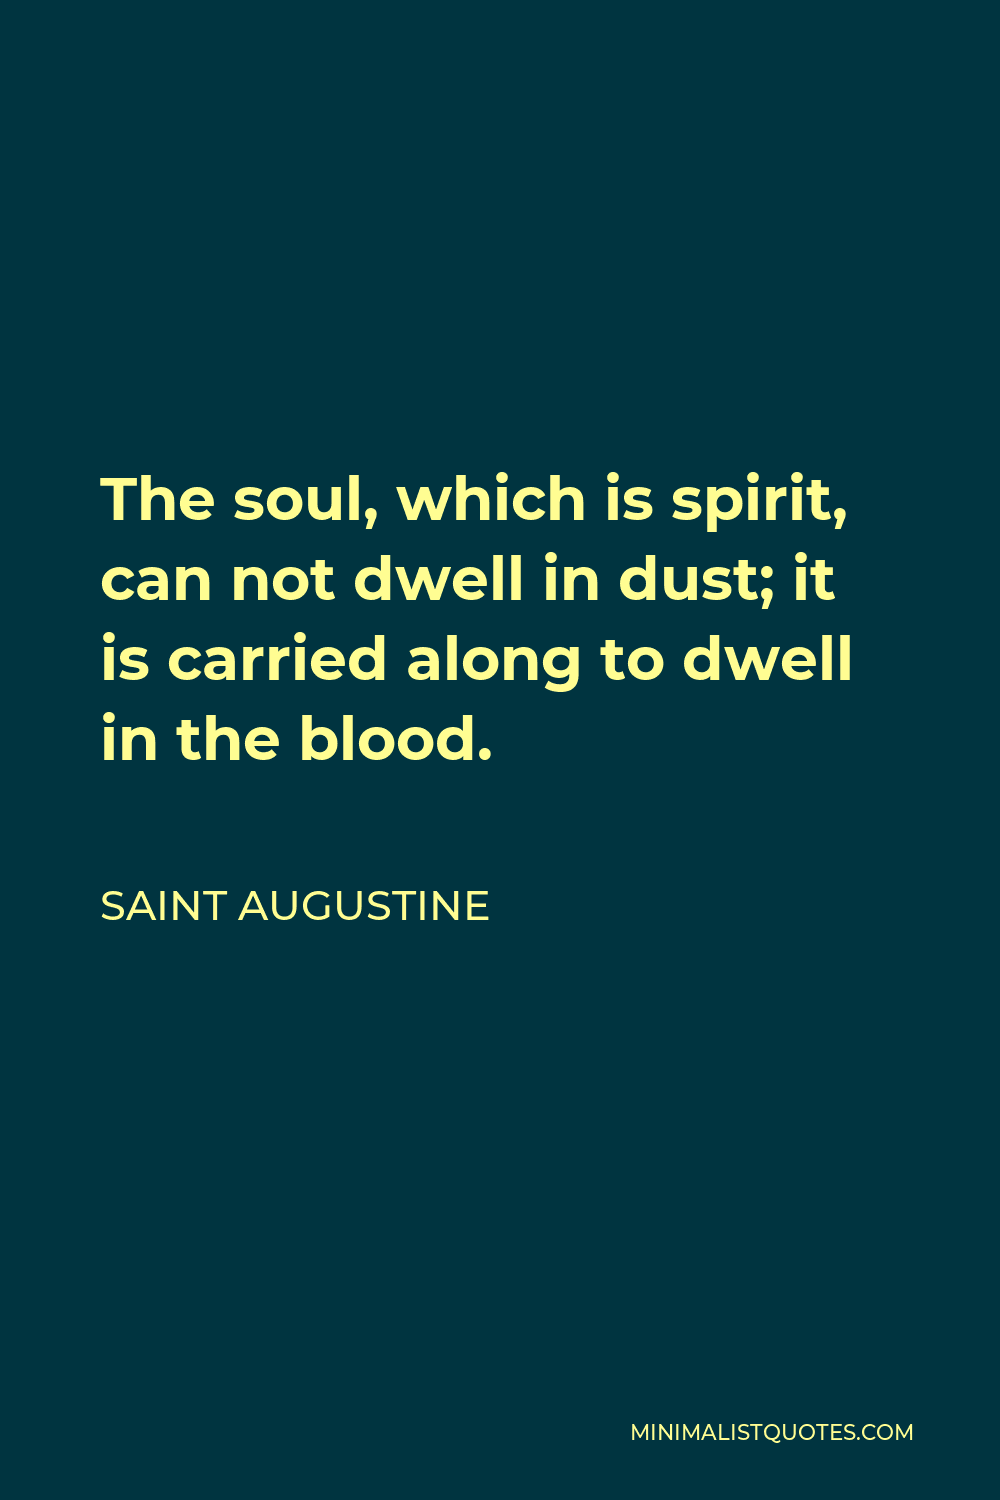 Saint Augustine Quote - The soul, which is spirit, can not dwell in dust; it is carried along to dwell in the blood.